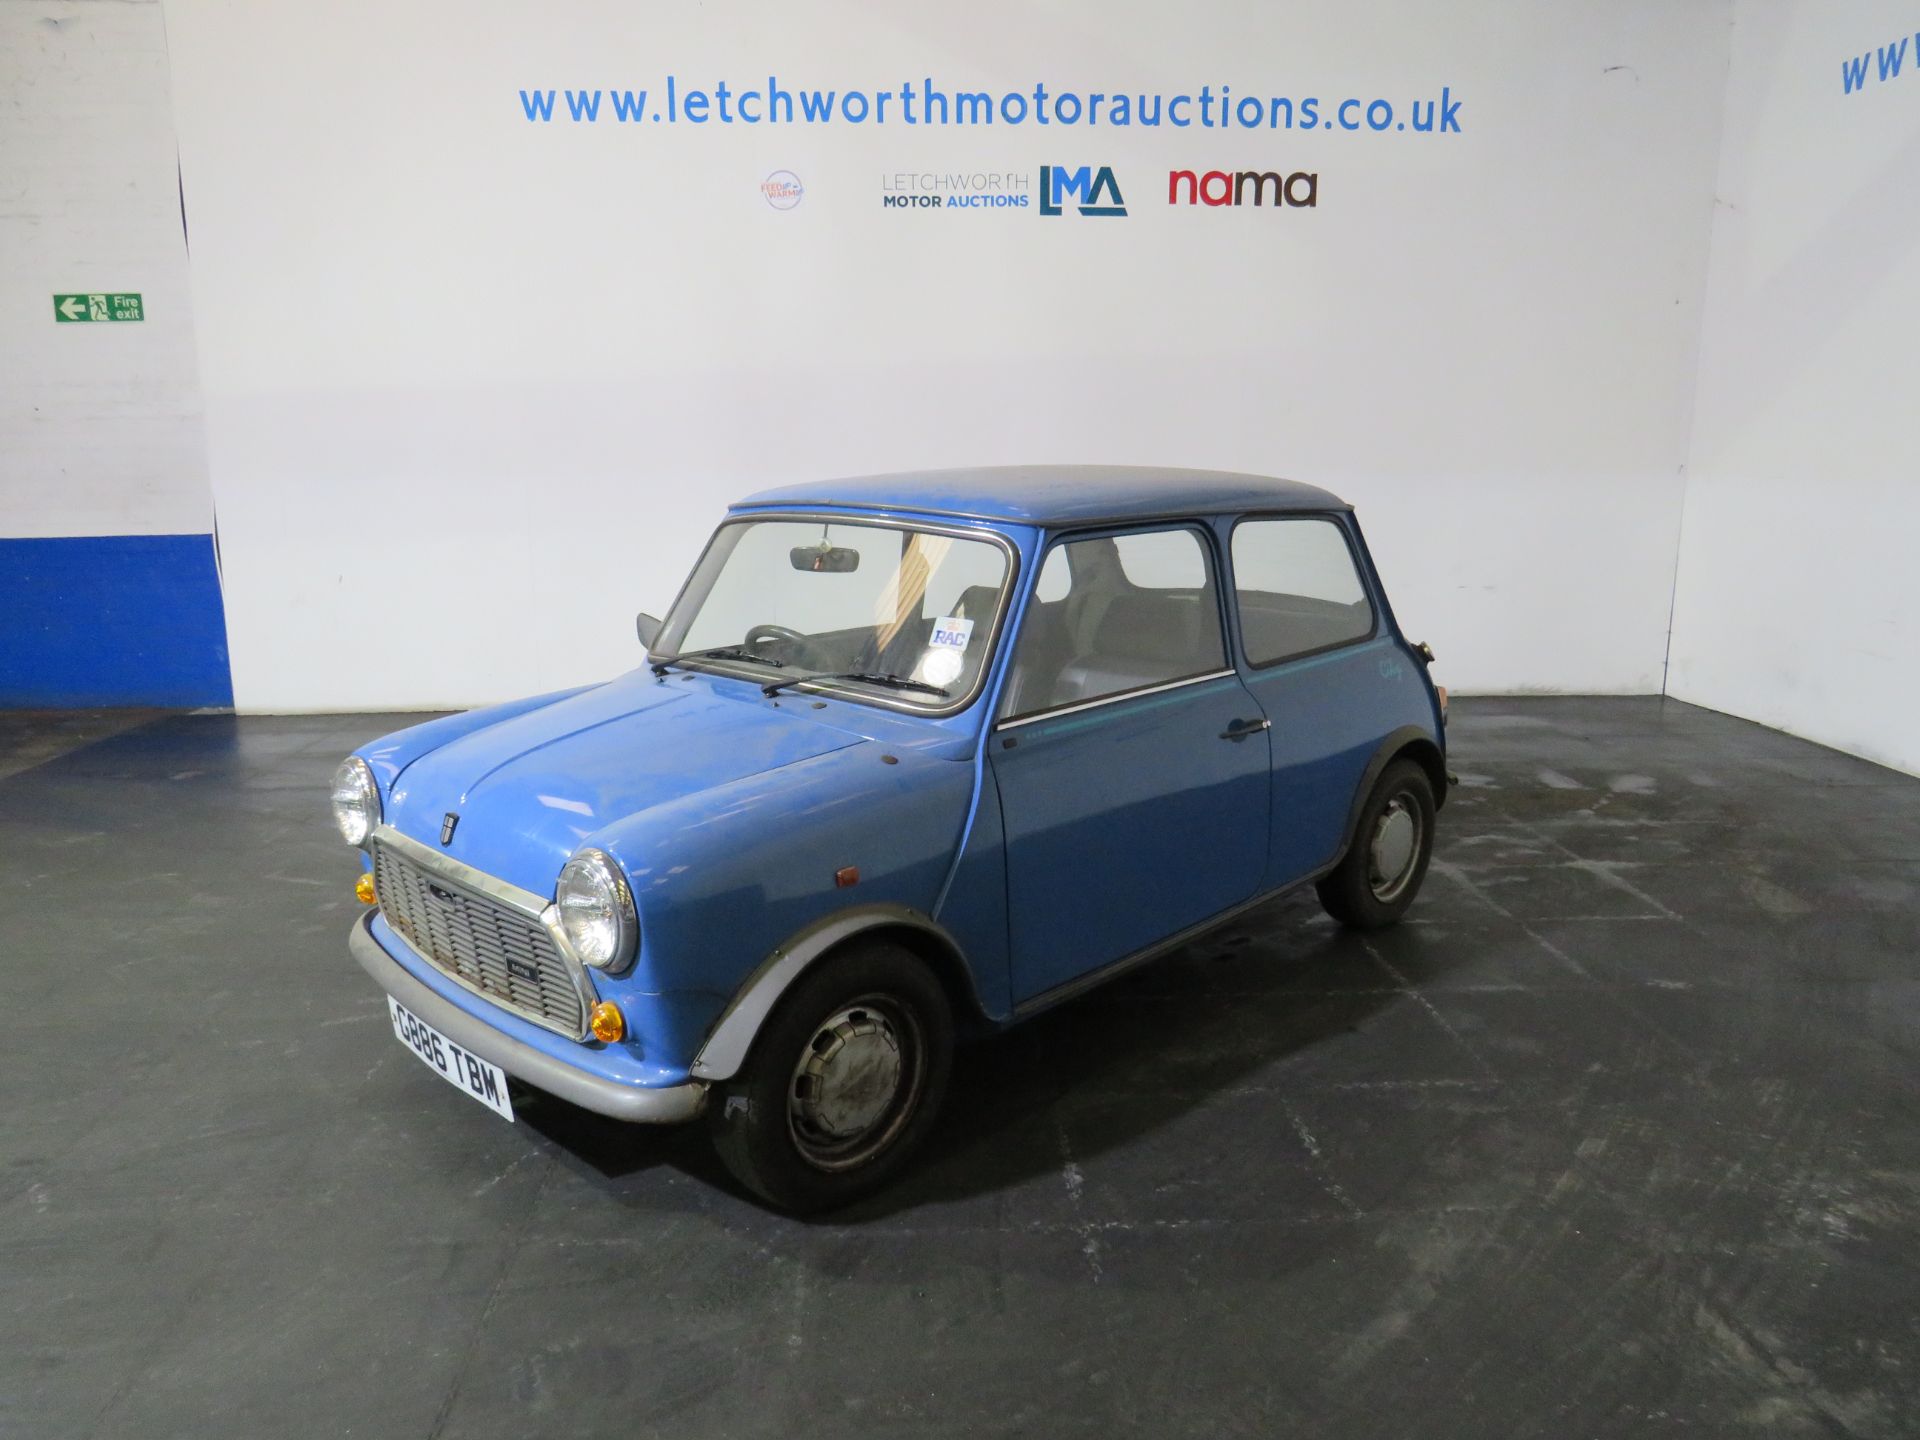 1989 Austin Mini 1000 City E - 998cc - ONE OWNER FROM NEW - Image 3 of 17